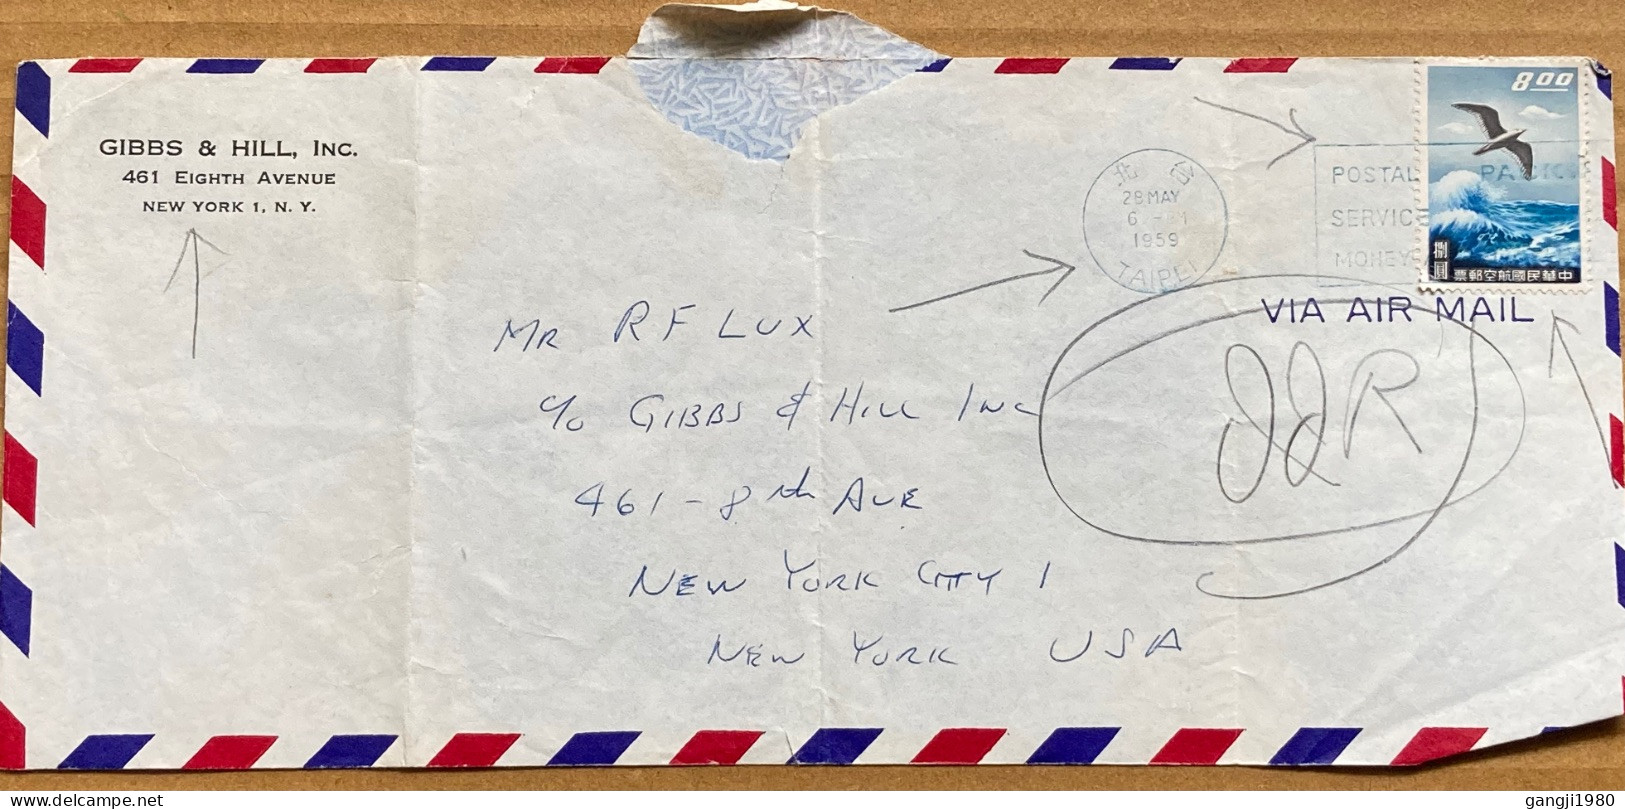 CHINA TAIWAN 1959, COVER USED TO USA, EARLY METER MACHINE, BLUE SLOGAN, POSTAL SERVICE MONEY, SEAGULL BIRD, GIBB'S & HIL - Brieven En Documenten